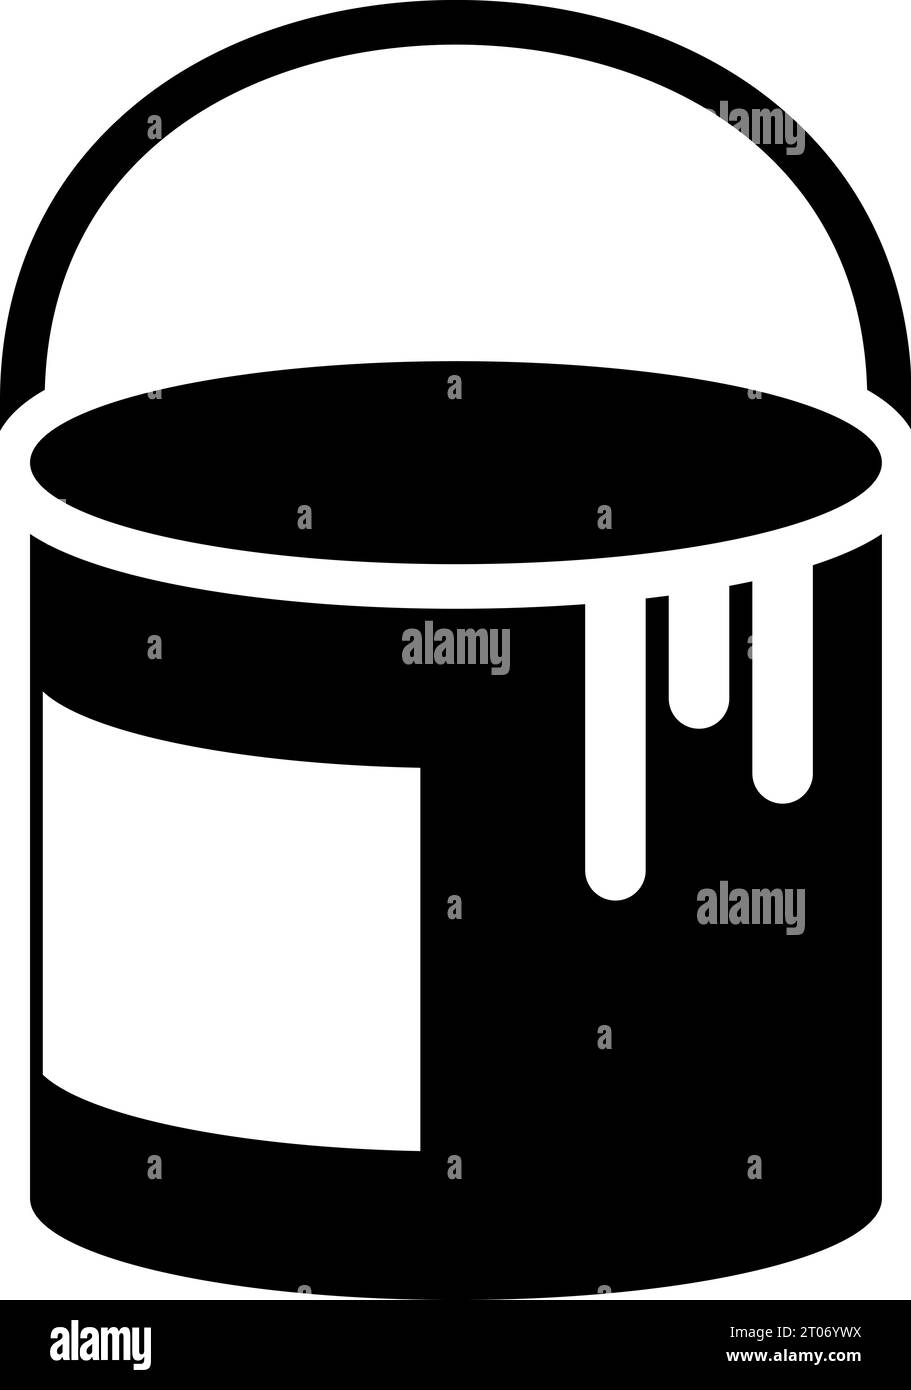 Paint can or paint color bucket vector illustration icon Stock Vector